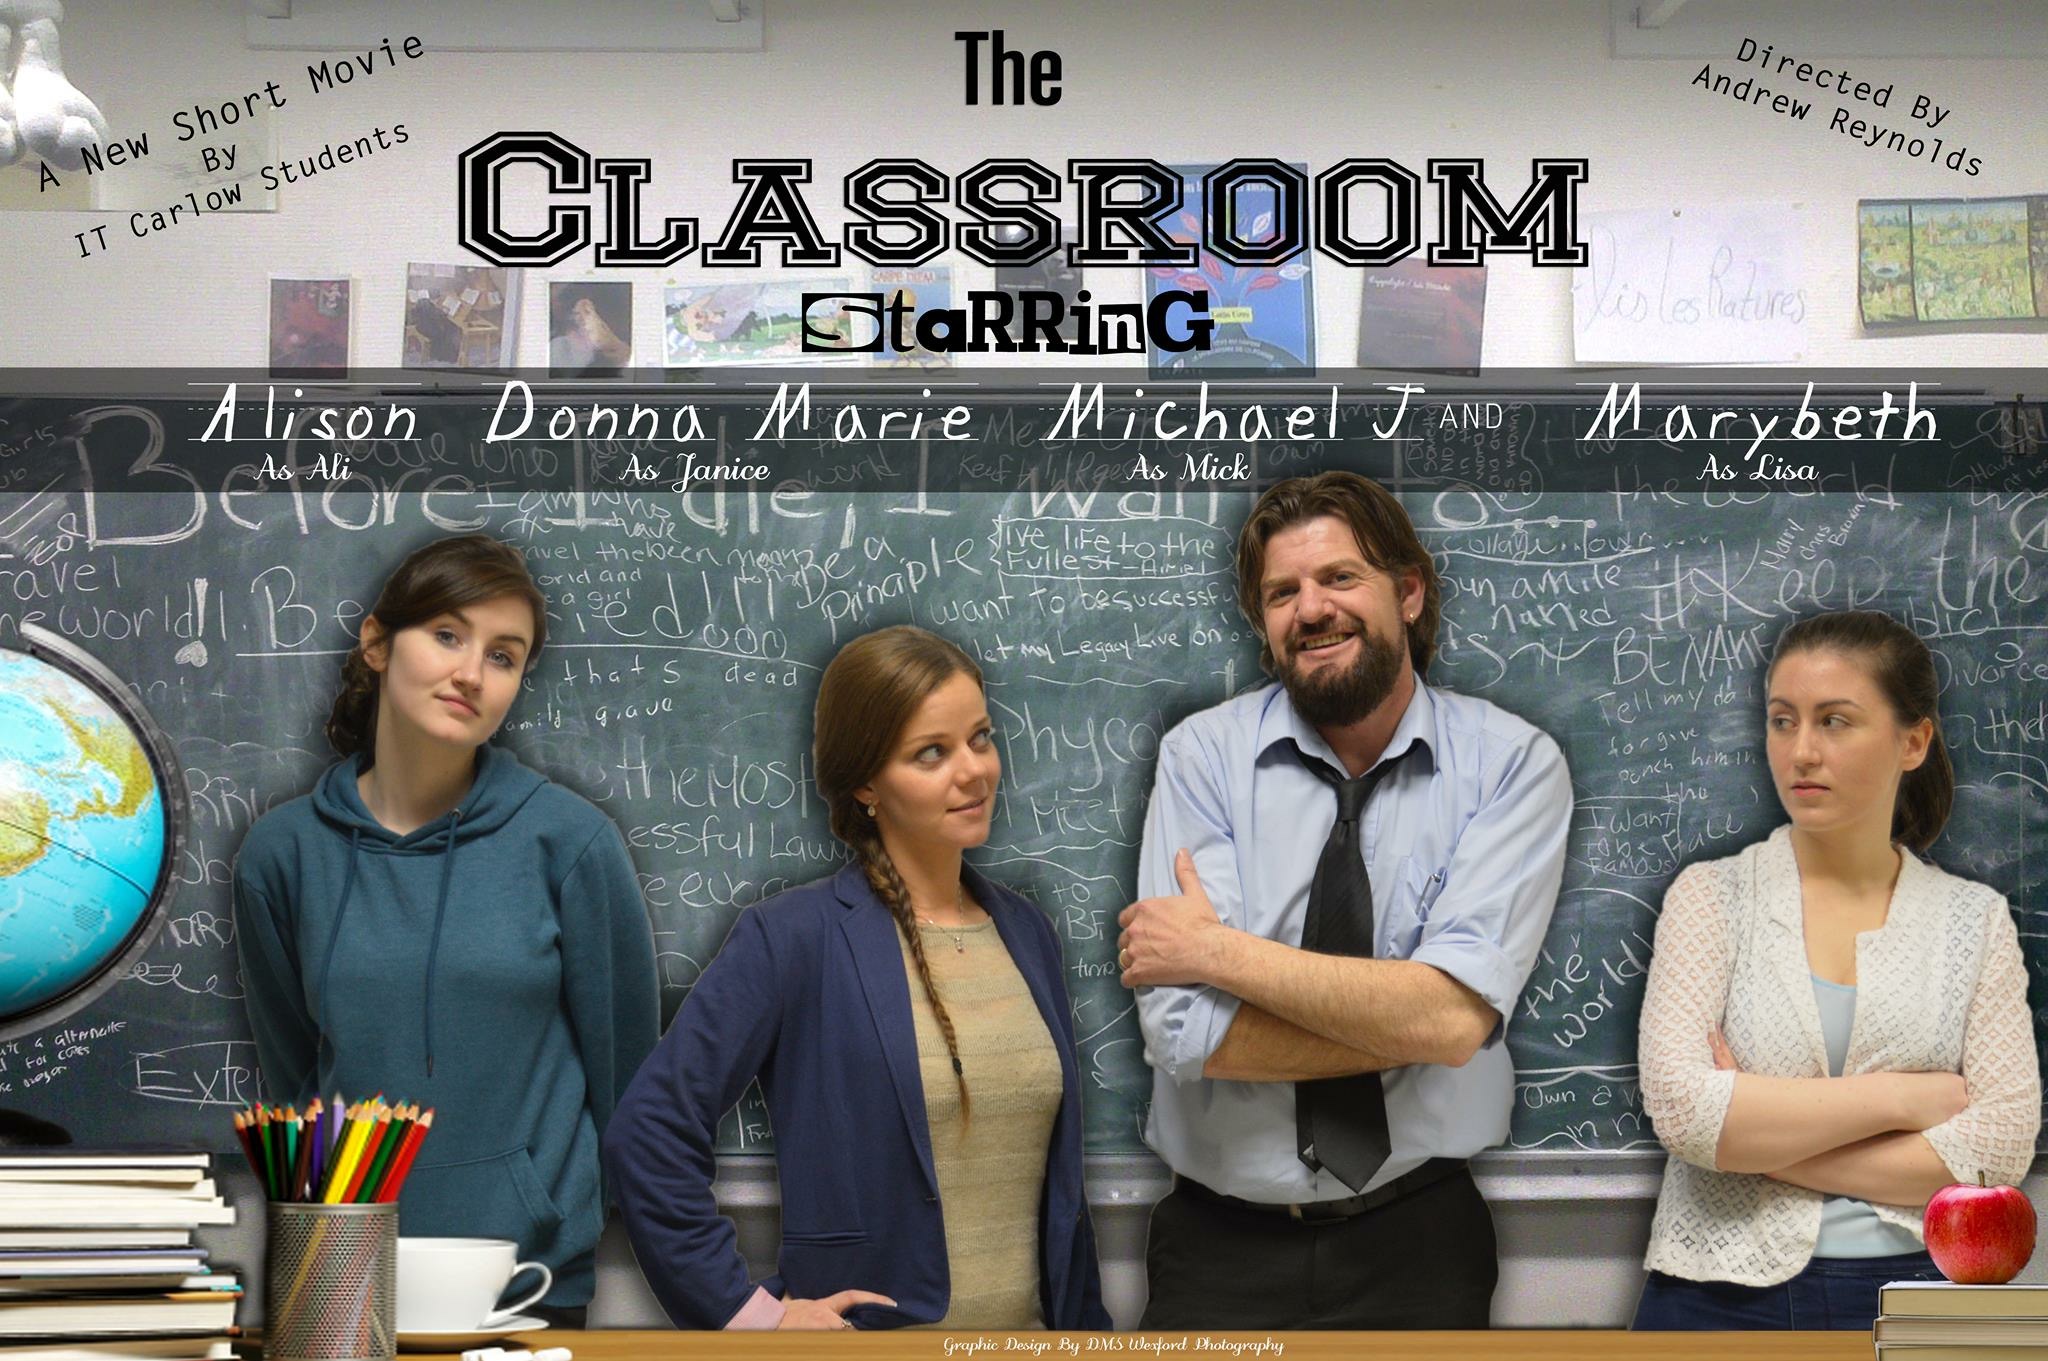 The Classroom A Short movie about a professor who thinks everyone in the school loves him when in fact it's quiet the opposite. All his students and co workers cannot stand him, bar one co worker 